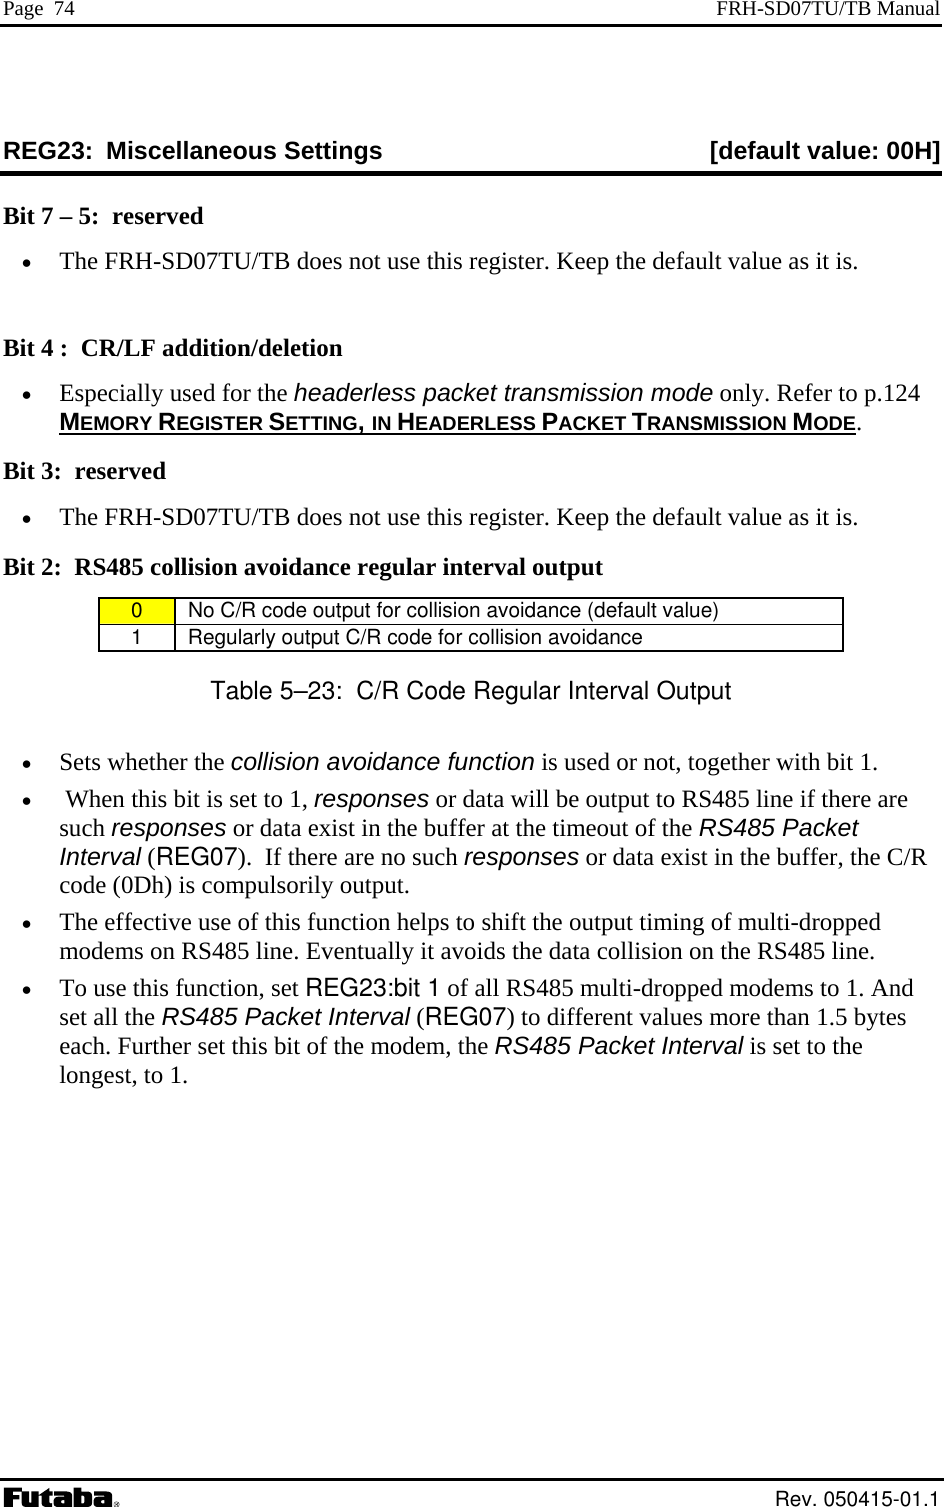 Page  74  FRH-SD07TU/TB Manual REG [default value: 00H] 23:  Miscellaneous Settings Bit 7 – 5:  reserved •  The FRH-SD07TU/TB does not use this register. Keep the default value as it is.  Bit 4 :  CR/LF addition•  Especially used for the headerless packet transmission mode only. Refer to p.124 /deletion MEMORY REGISTER SETTING, IN HEADERLESS PACKET TRANSMISSION MODE. :  reserved Bit 3Bit 2:  RS485 collision avoidance regular interval output •  The FRH-SD07TU/TB does not use this register. Keep the default value as it is. 0   No C/R code output for collision avoidance (default value) 1 ularly output C/R code for collis nce    Reg ion avoidaTable 5–23:  C/R Code Regular Interval Output •  Sets whether t•   When this bit is se 485 line if there are such responses oInterval (REG07).  If there are no such responses or data exist in the buffer, the C/R    Eventually it avoids the data collision on the RS485 line.  •  To use this function, set REG23:bit 1 of all RS485 multi-dropped modems to 1. And set all the RS485 Packet Interval (REG07) to different values more than 1.5 bytes each. Further set this bit of the modem, the RS485 Packet Interval is set to the longest, to 1. he collision avoidance function is used or not, together with bit 1. t to 1, responses or data will be output to RSr data exist in the buffer at the timeout of the RS485 Packet code (0Dh) is compulsorily output. •  The effective use of this function helps to shift the output timing of multi-droppedmodems on RS485 line. Rev. 050415-01.1 